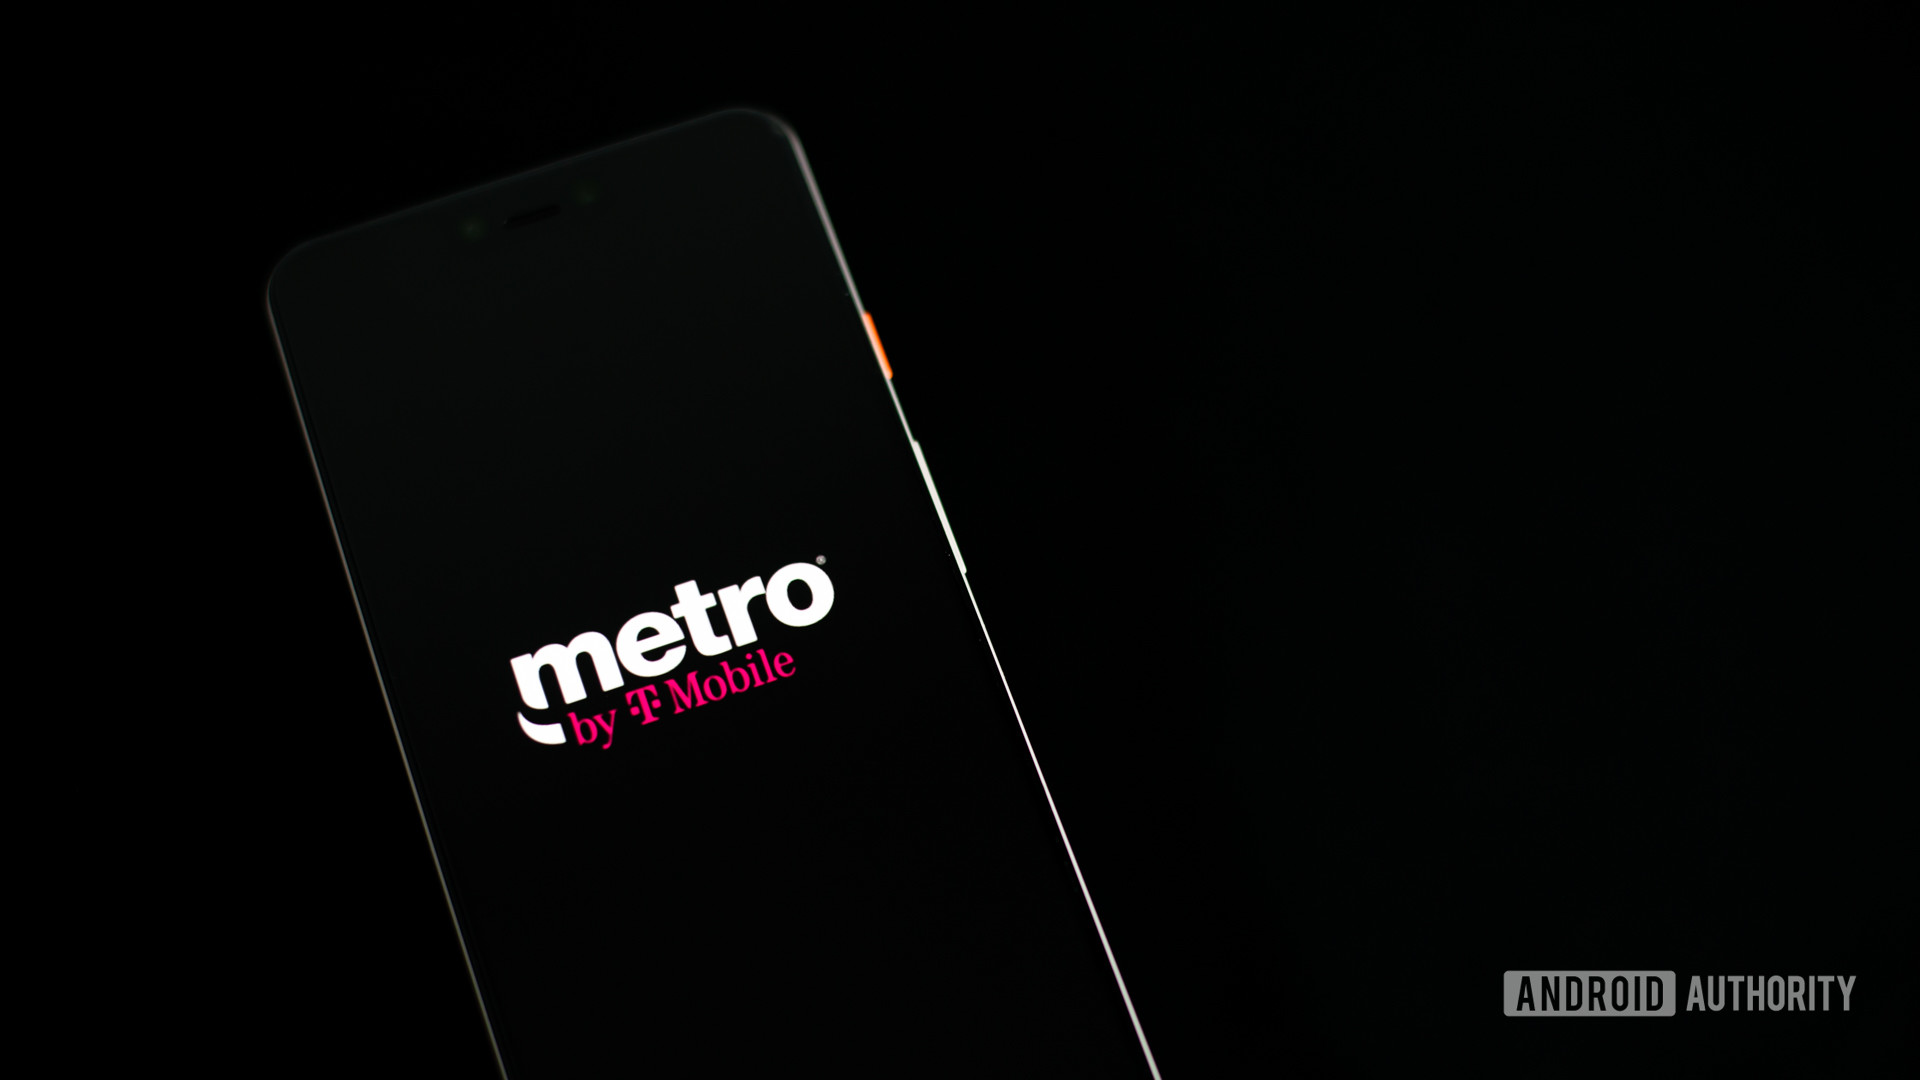 Metro by T Mobile logo on phone stock photo 2